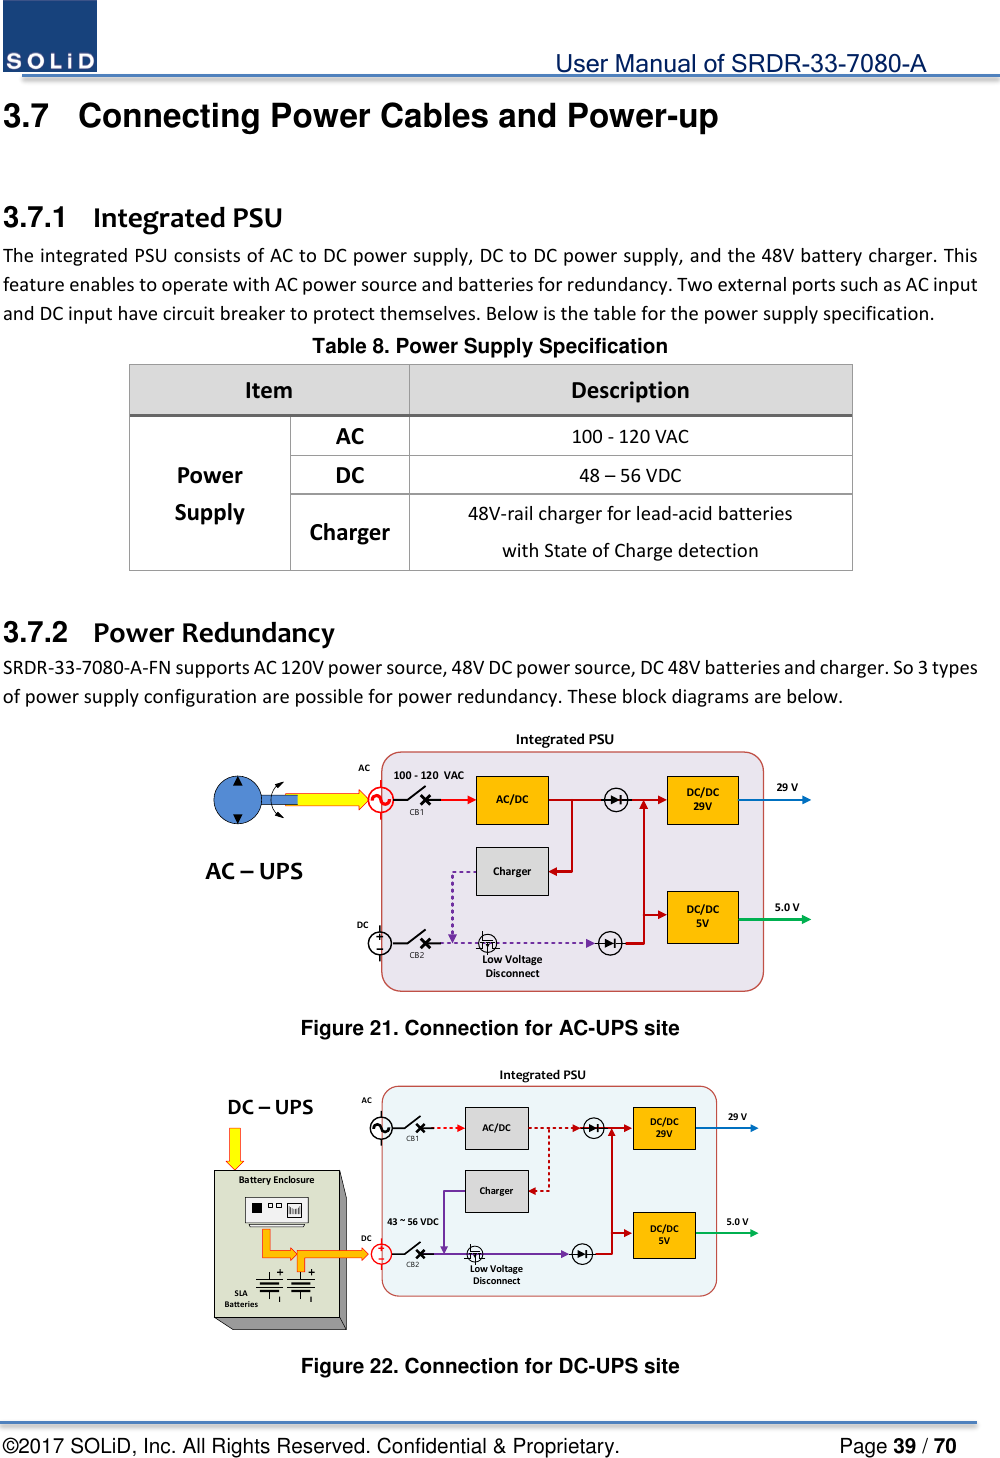                                             User Manual of SRDR-33-7080-A ©2017 SOLiD, Inc. All Rights Reserved. Confidential &amp; Proprietary.                     Page 39 / 70 3.7  Connecting Power Cables and Power-up  3.7.1  Integrated PSU The integrated PSU consists of AC to DC power supply, DC to DC power supply, and the 48V battery charger. This feature enables to operate with AC power source and batteries for redundancy. Two external ports such as AC input and DC input have circuit breaker to protect themselves. Below is the table for the power supply specification. Table 8. Power Supply Specification Item Description Power Supply AC 100 - 120 VAC DC 48 – 56 VDC Charger 48V-rail charger for lead-acid batteries with State of Charge detection  3.7.2   Power Redundancy SRDR-33-7080-A-FN supports AC 120V power source, 48V DC power source, DC 48V batteries and charger. So 3 types of power supply configuration are possible for power redundancy. These block diagrams are below. 100 - 120  VACACDCAC/DCChargerDC/DC29VDC/DC5V29 V5.0 VAC – UPS Low Voltage DisconnectCB2CB1Integrated PSU Figure 21. Connection for AC-UPS site ACDC43 ~ 56 VDCAC/DCChargerDC – UPS DC/DC5V29 V5.0 VBattery EnclosureLow Voltage DisconnectDC/DC29VCB1CB2SLA BatteriesIntegrated PSU Figure 22. Connection for DC-UPS site 